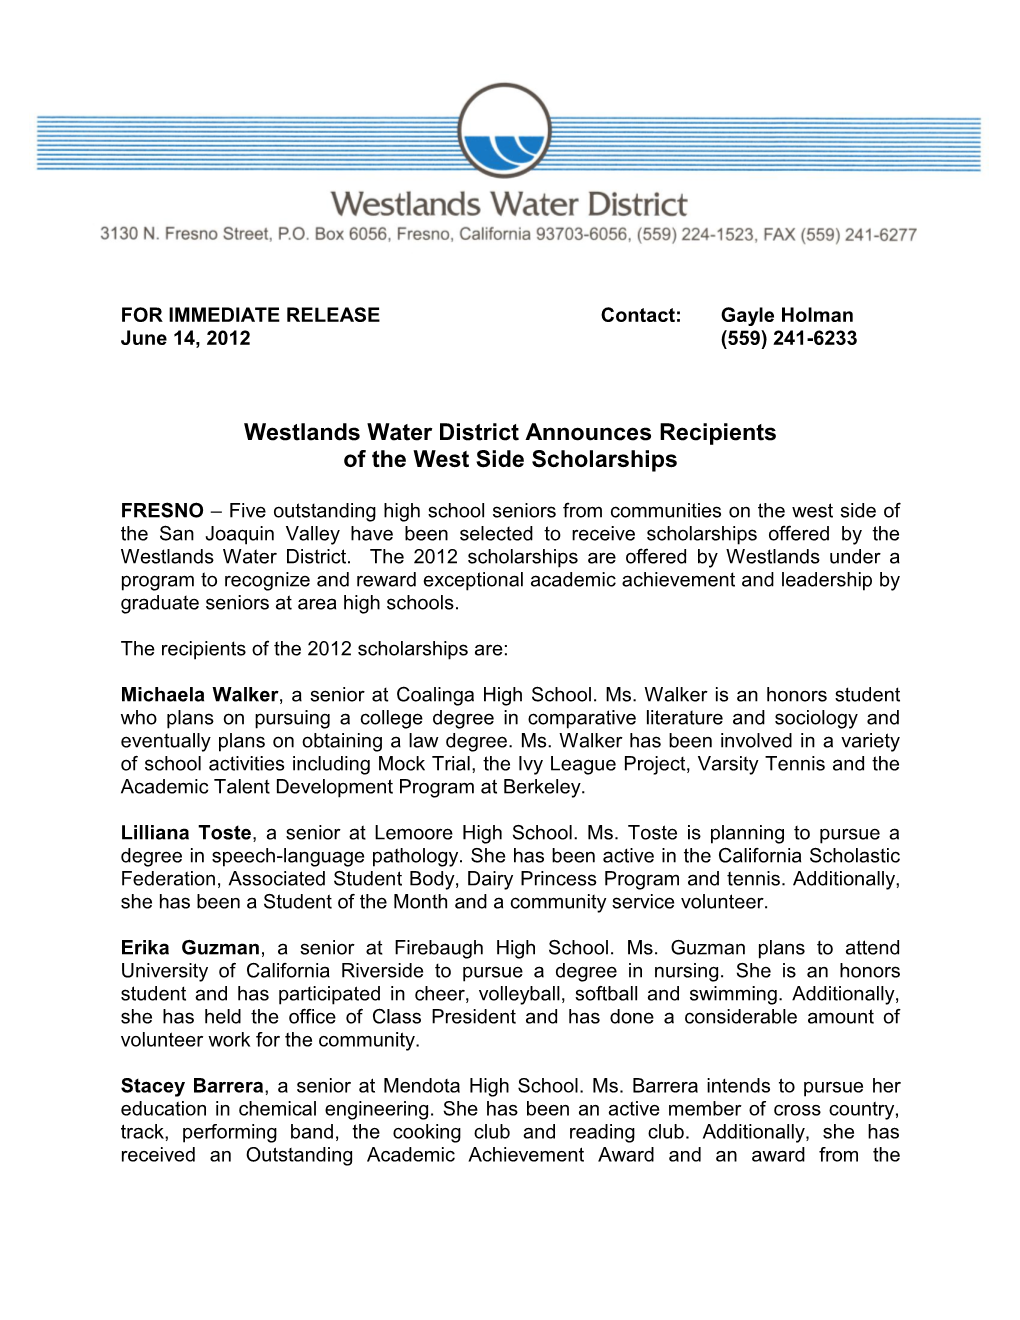 Westlands Water District Announces Recipients of the West Side Scholarships